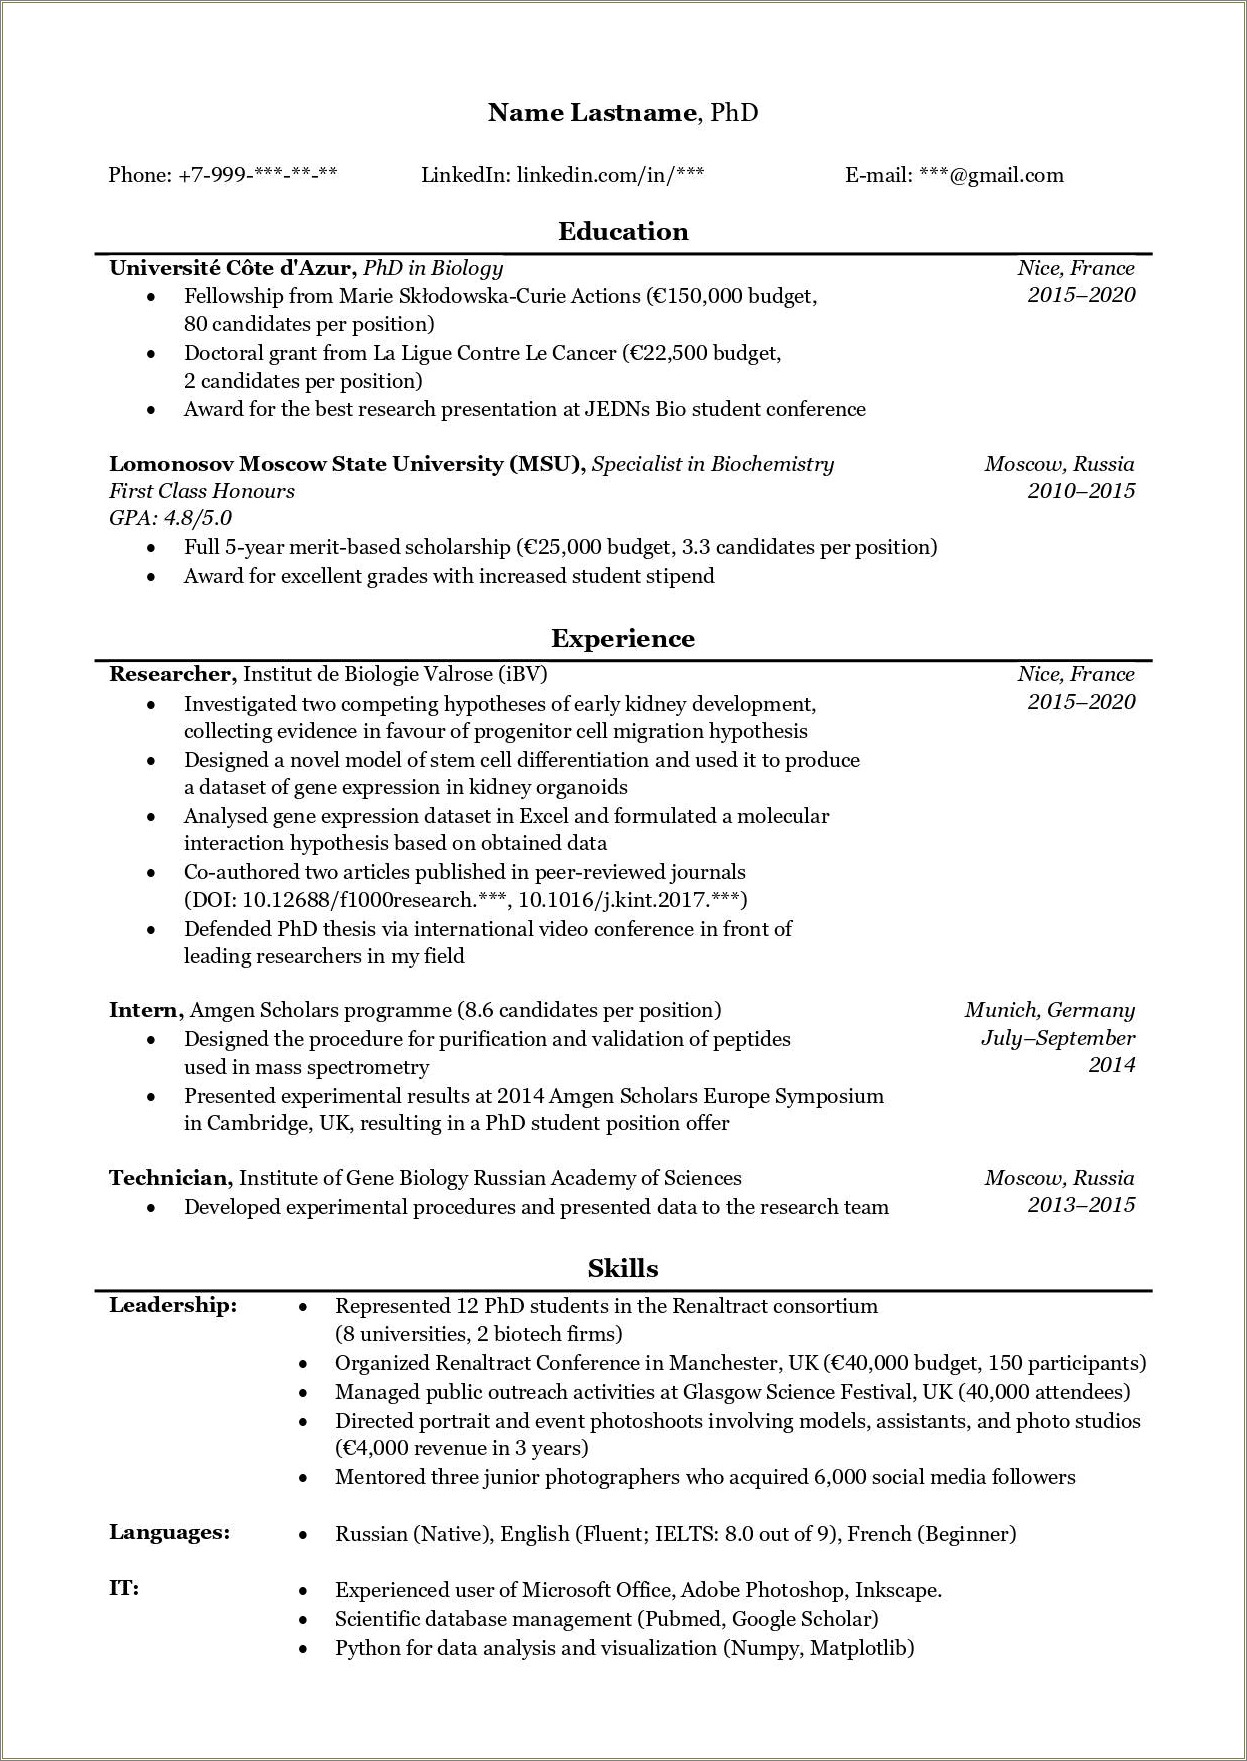 Best Industry Resume For Phd Graduates